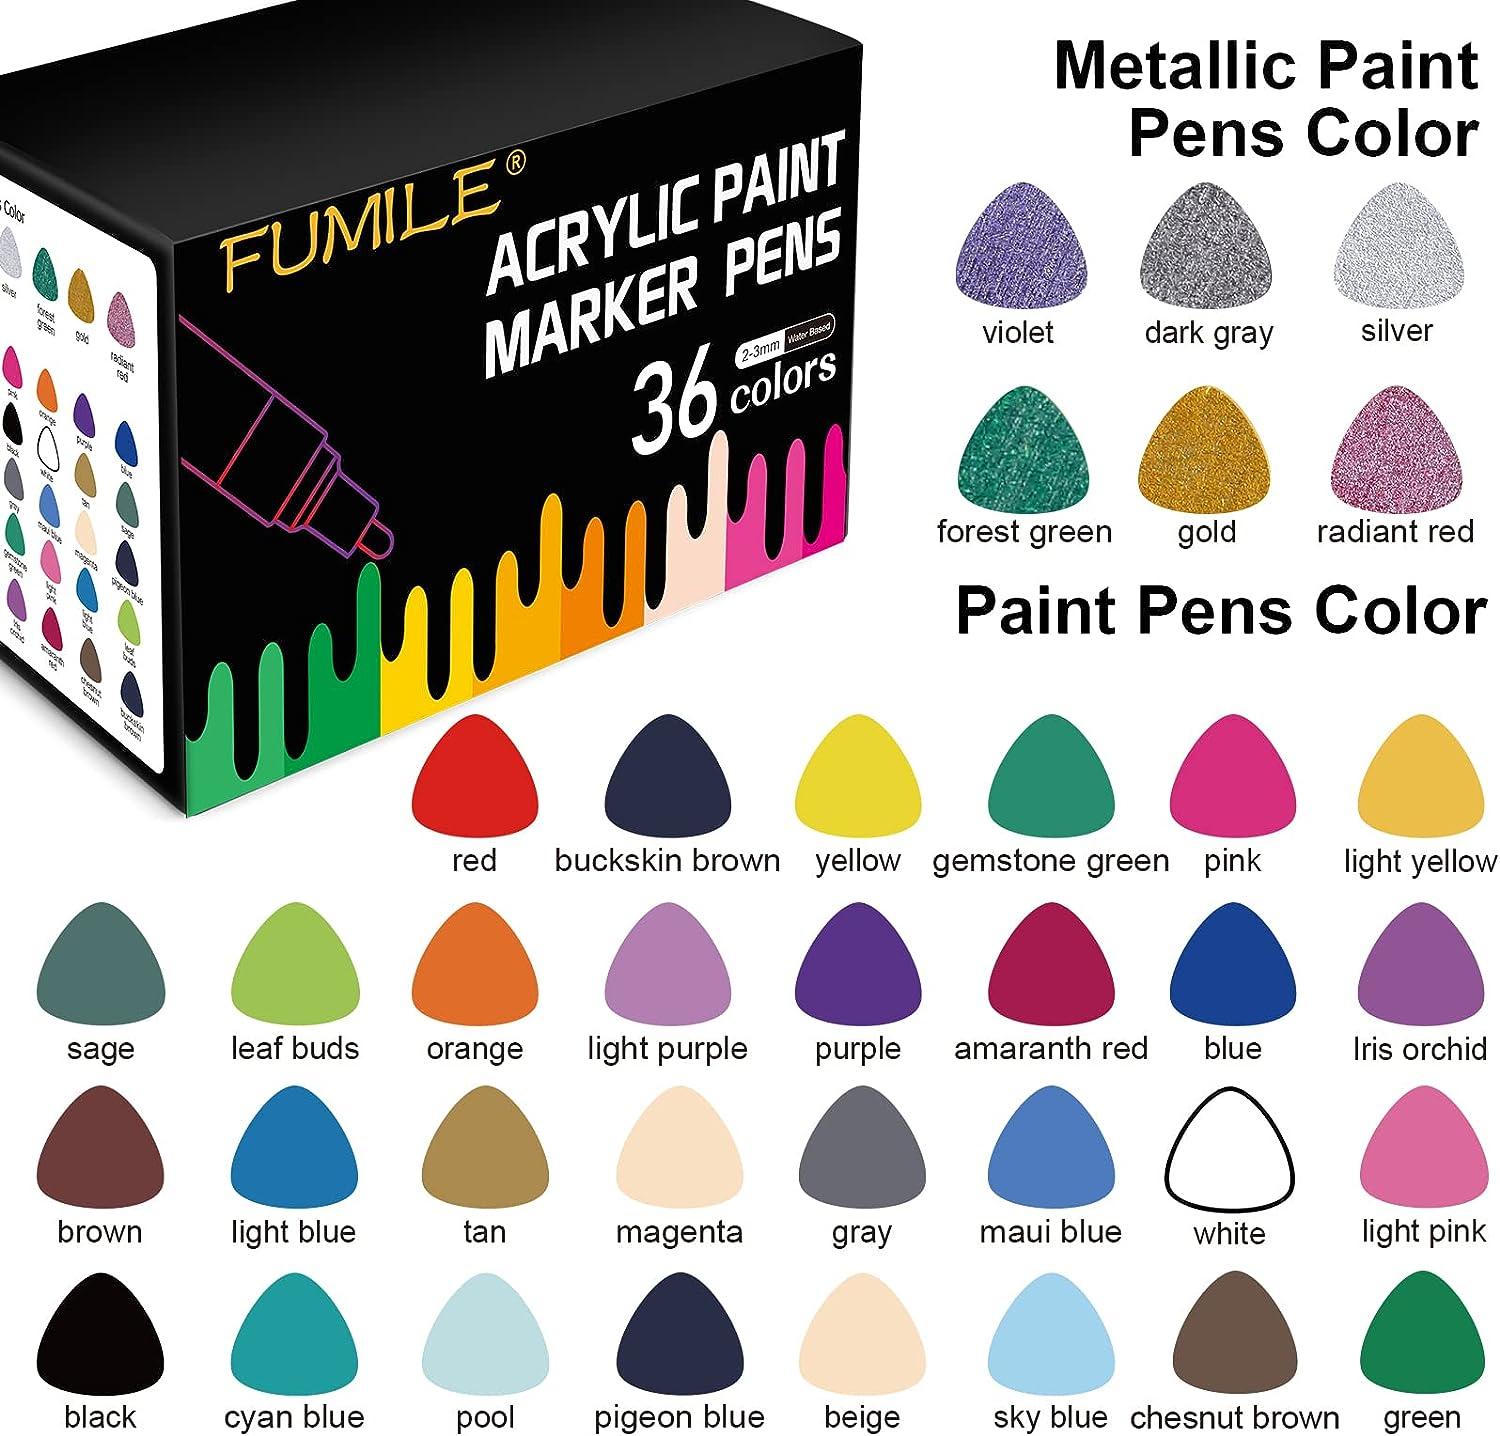 AROIC 24 Pack Acrylic Paint Pens for Rock Painting Fine Point Paint Markers Acrylic Paint Markers for Wood,Metal,Plastic,Glass,Canvas, Ceramic,Craft